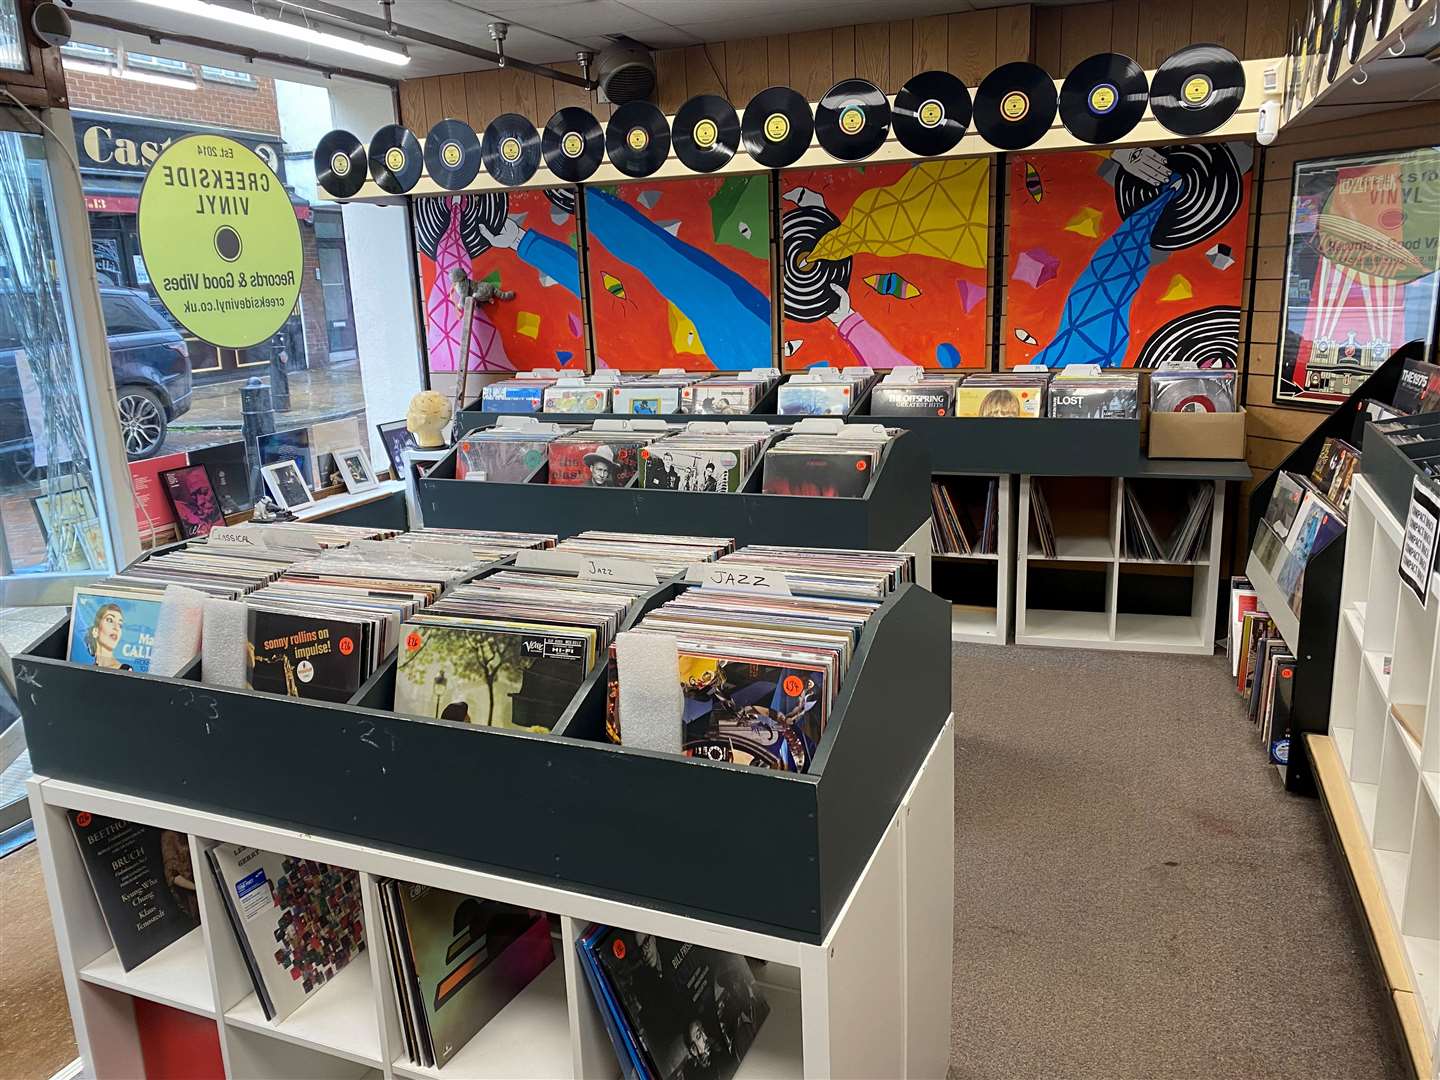 Creekside Vinyl will remain open until a new owner is found